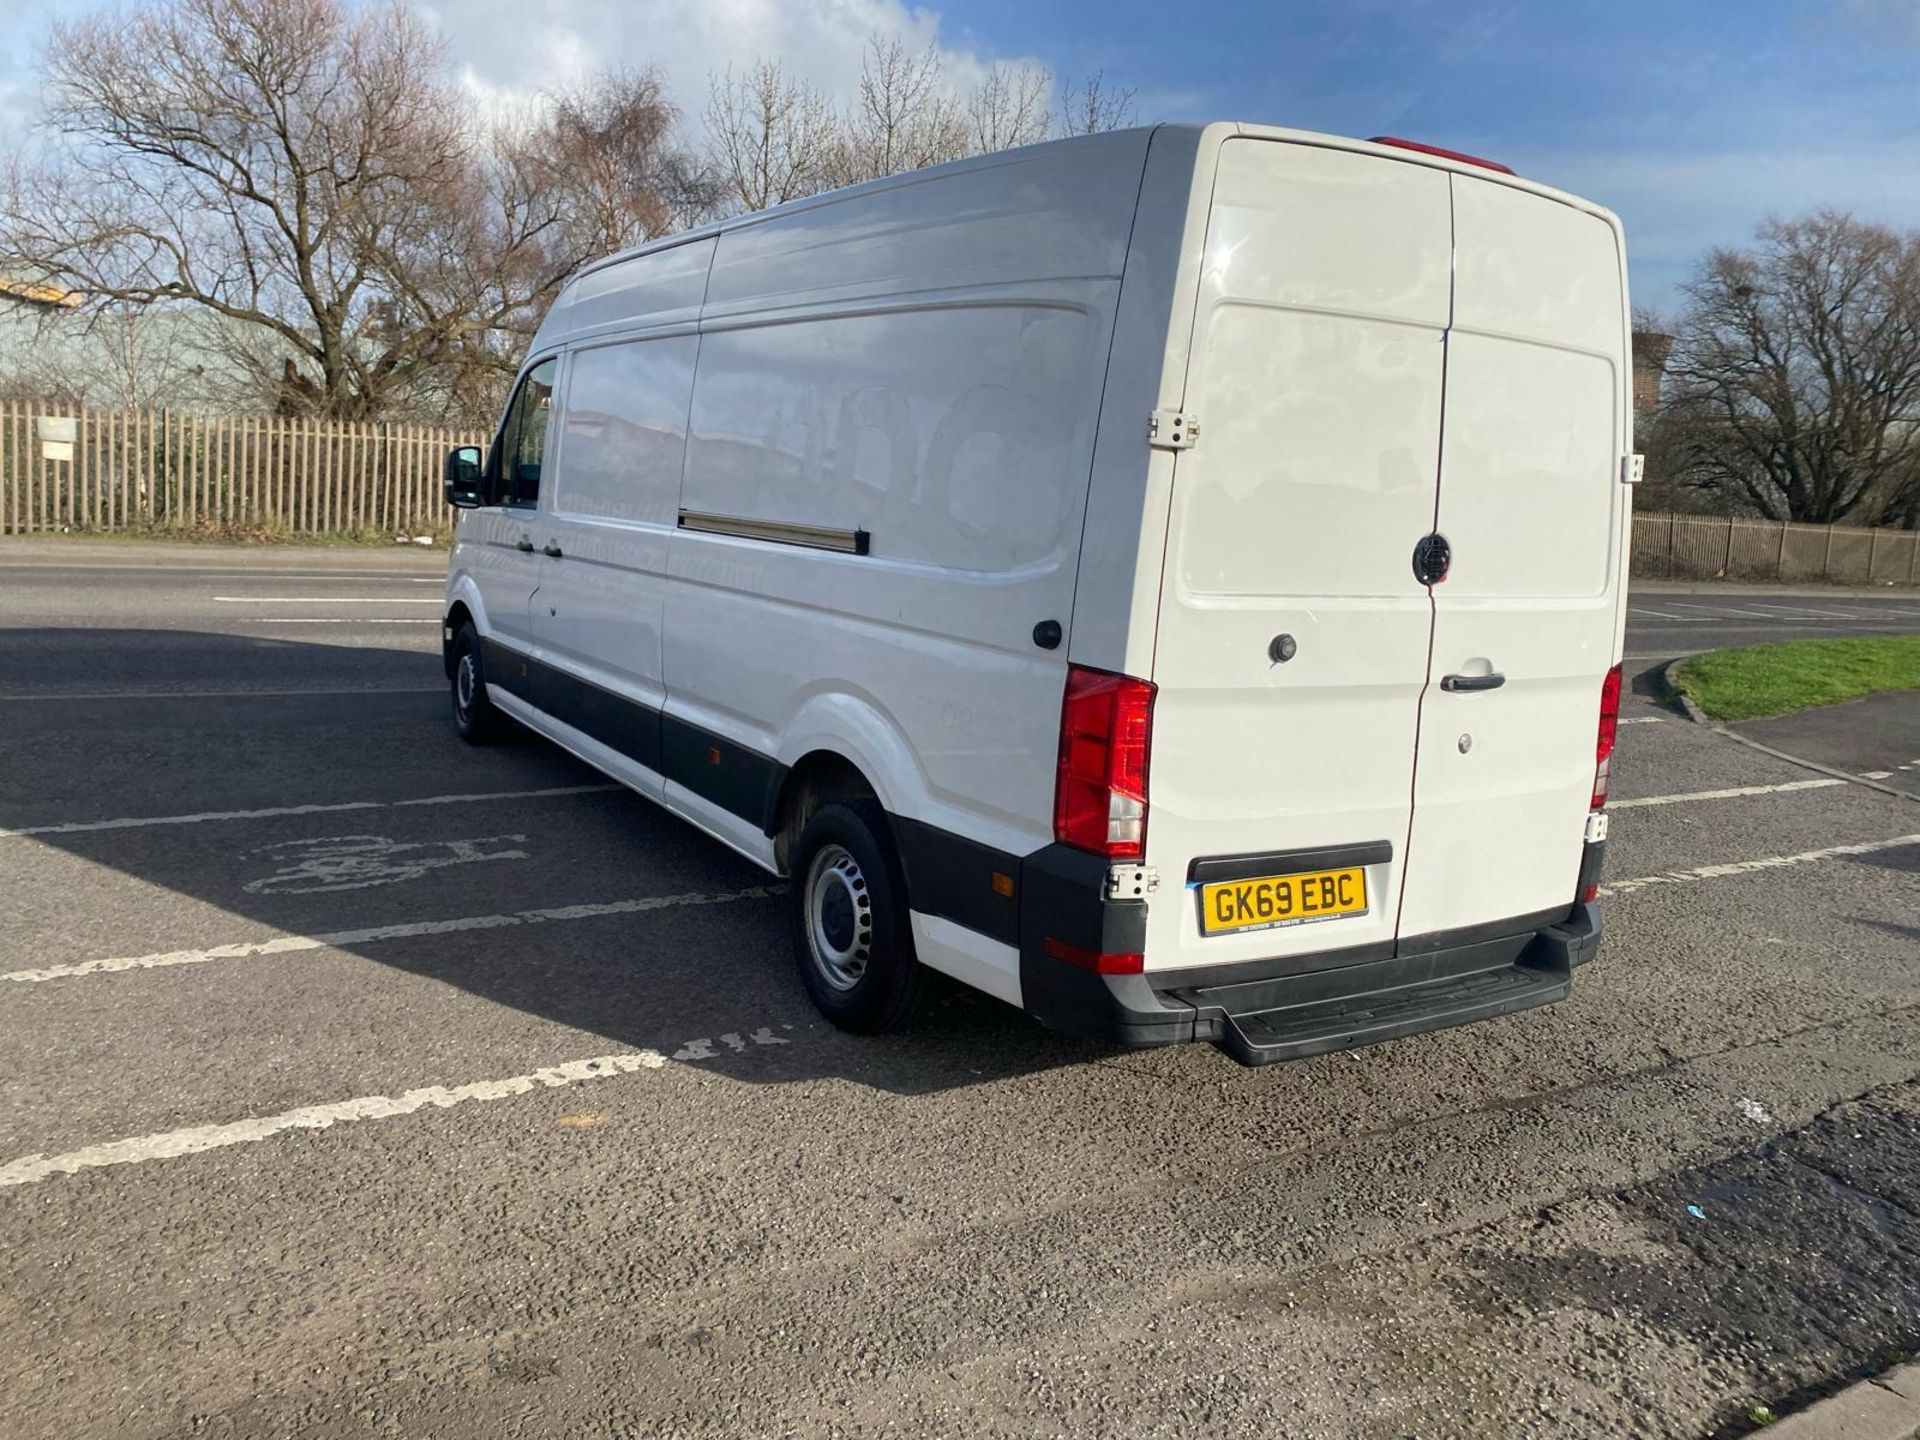 2019 69 VOLKSWAGEN CRAFTER LWB HIGH ROOF PANEL VAN - 87K MILES - PLY LINED. - Image 8 of 12